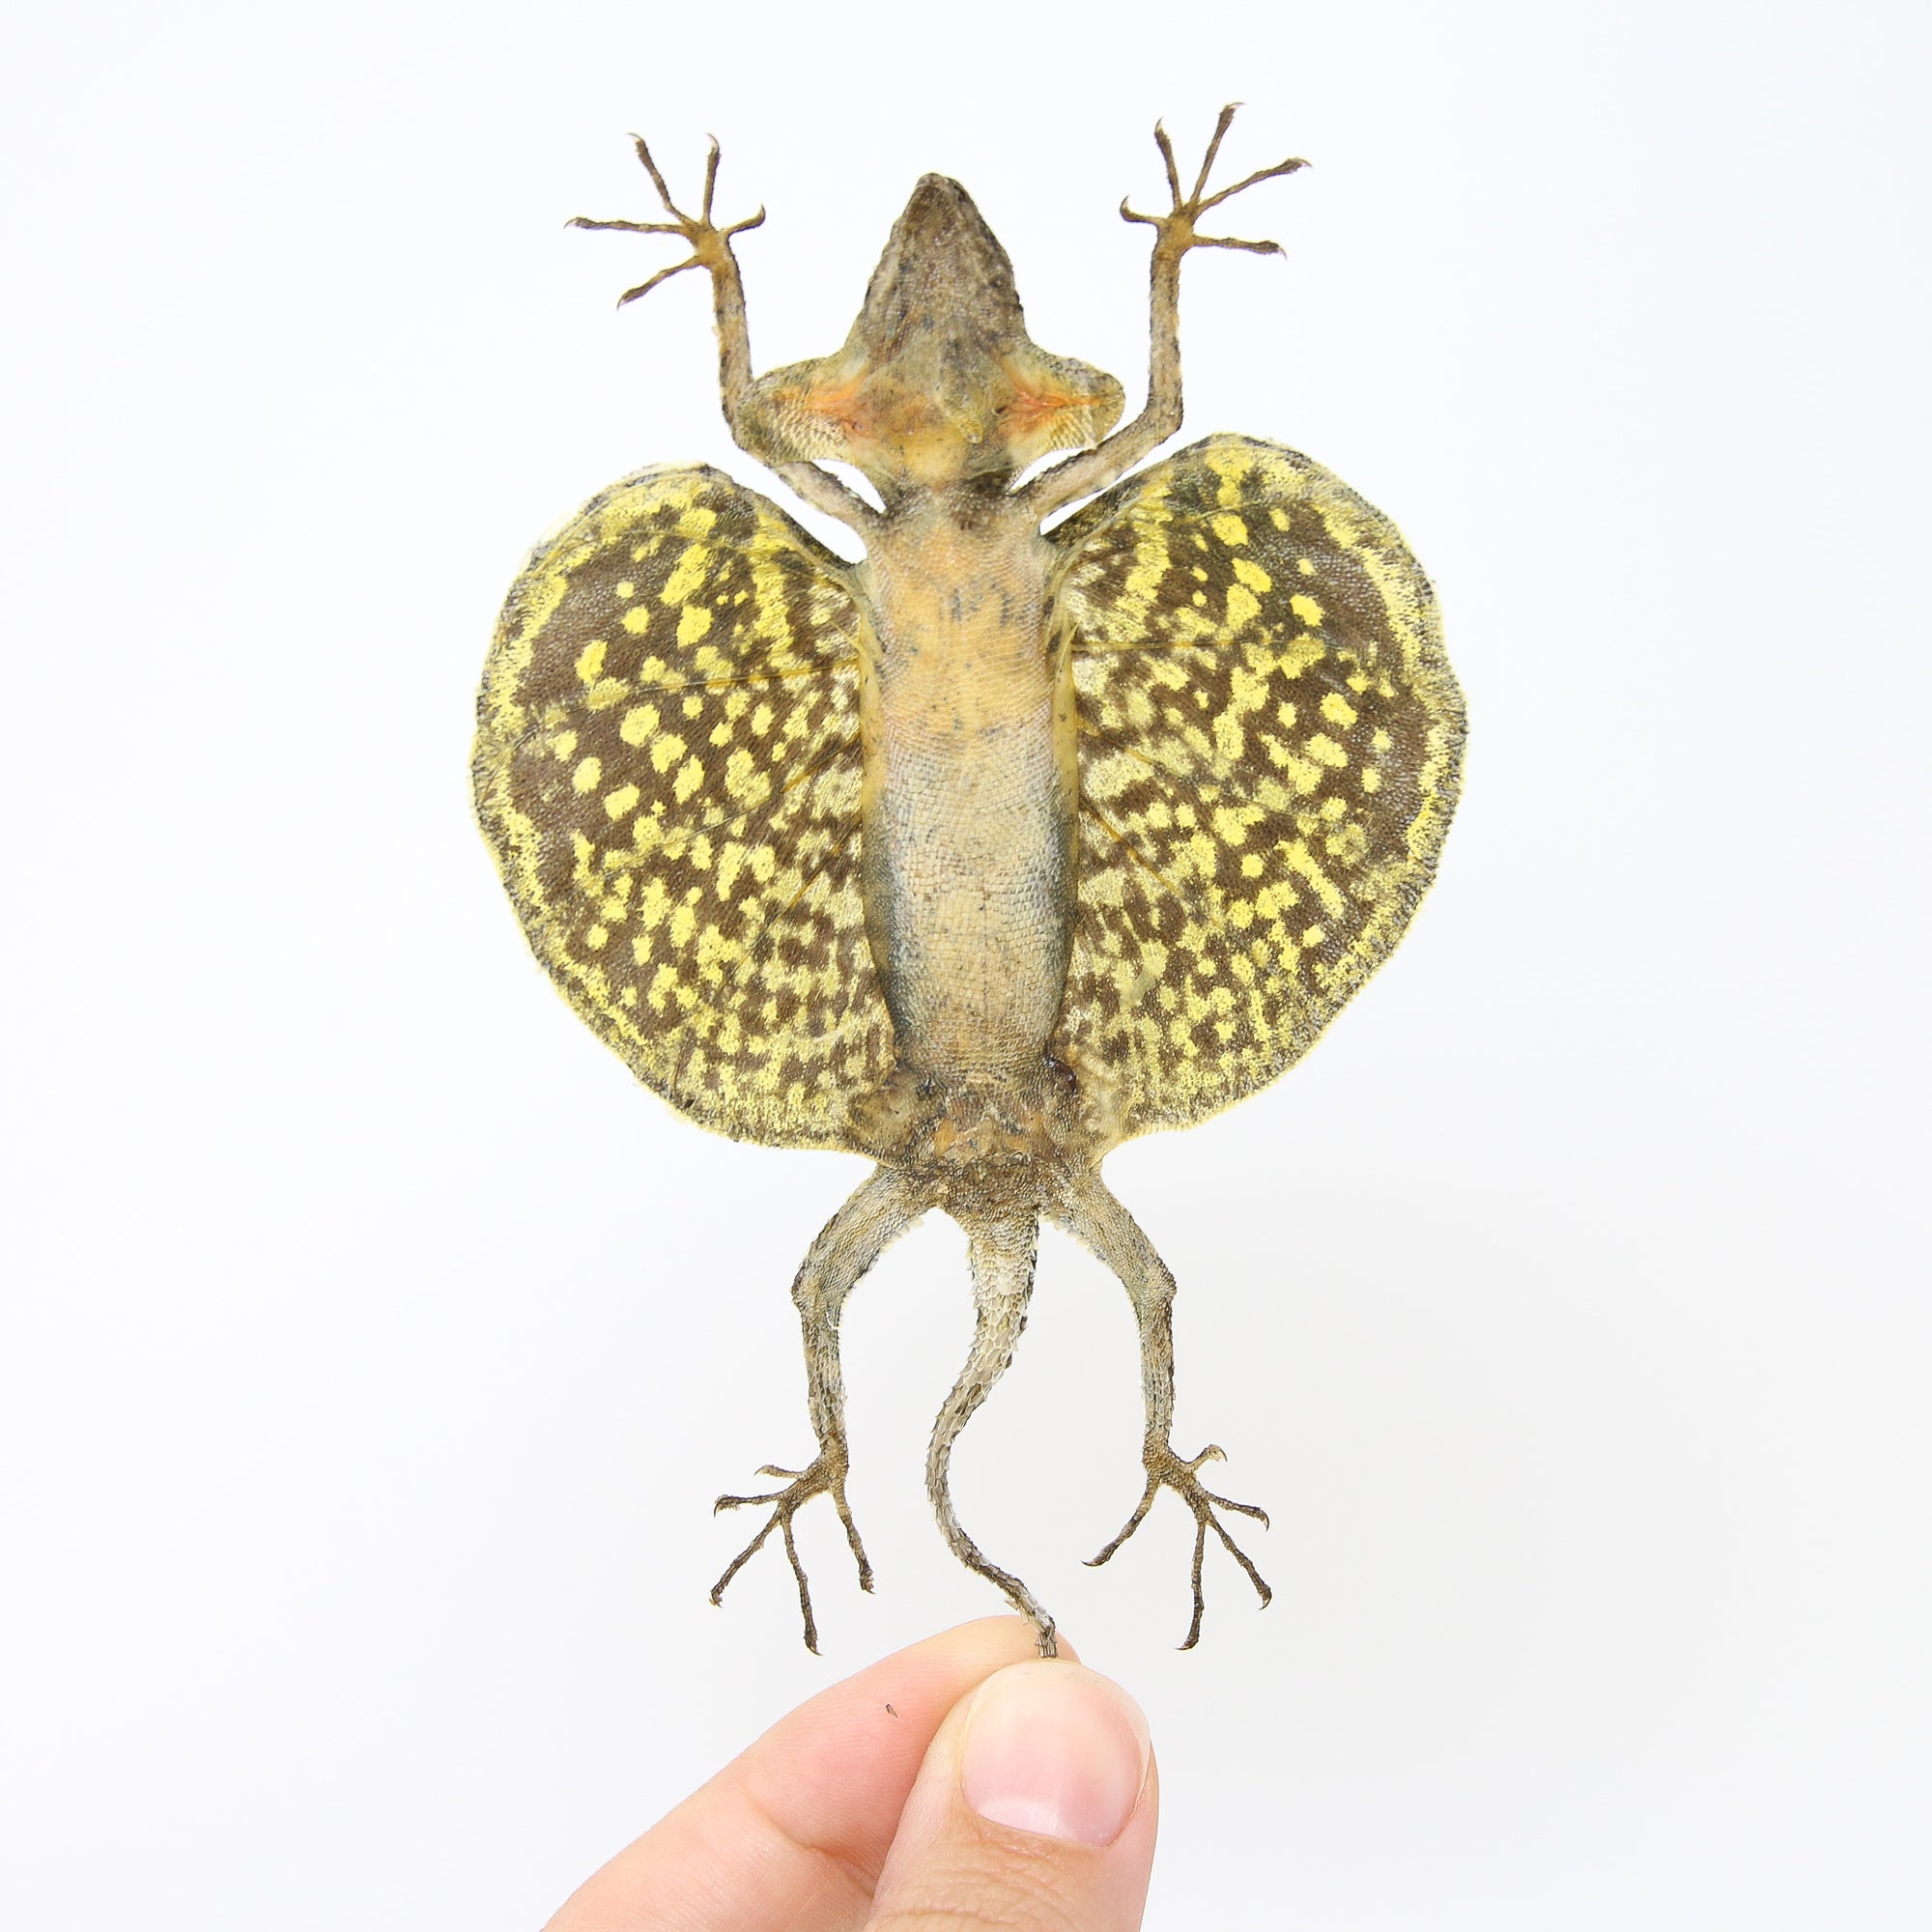 TWO (2) PAIR of Draco Flying Lizards (Draco haematopogon) | A1 Spread Specimens 20cm | Indonesia Java | Dry-Preserved Taxidermy